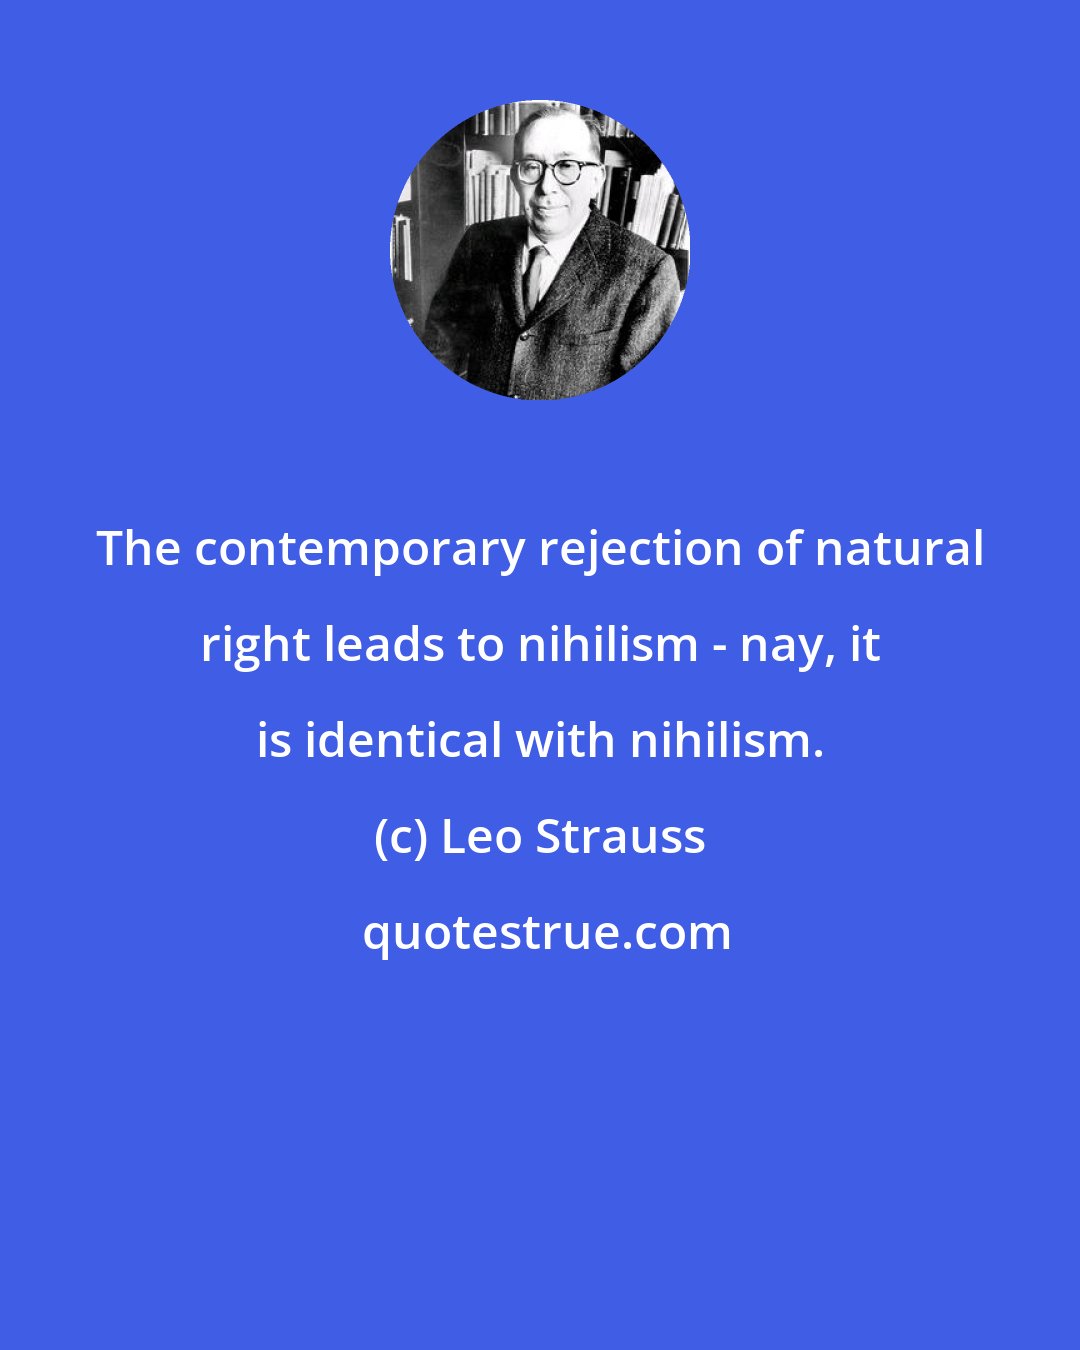 Leo Strauss: The contemporary rejection of natural right leads to nihilism - nay, it is identical with nihilism.